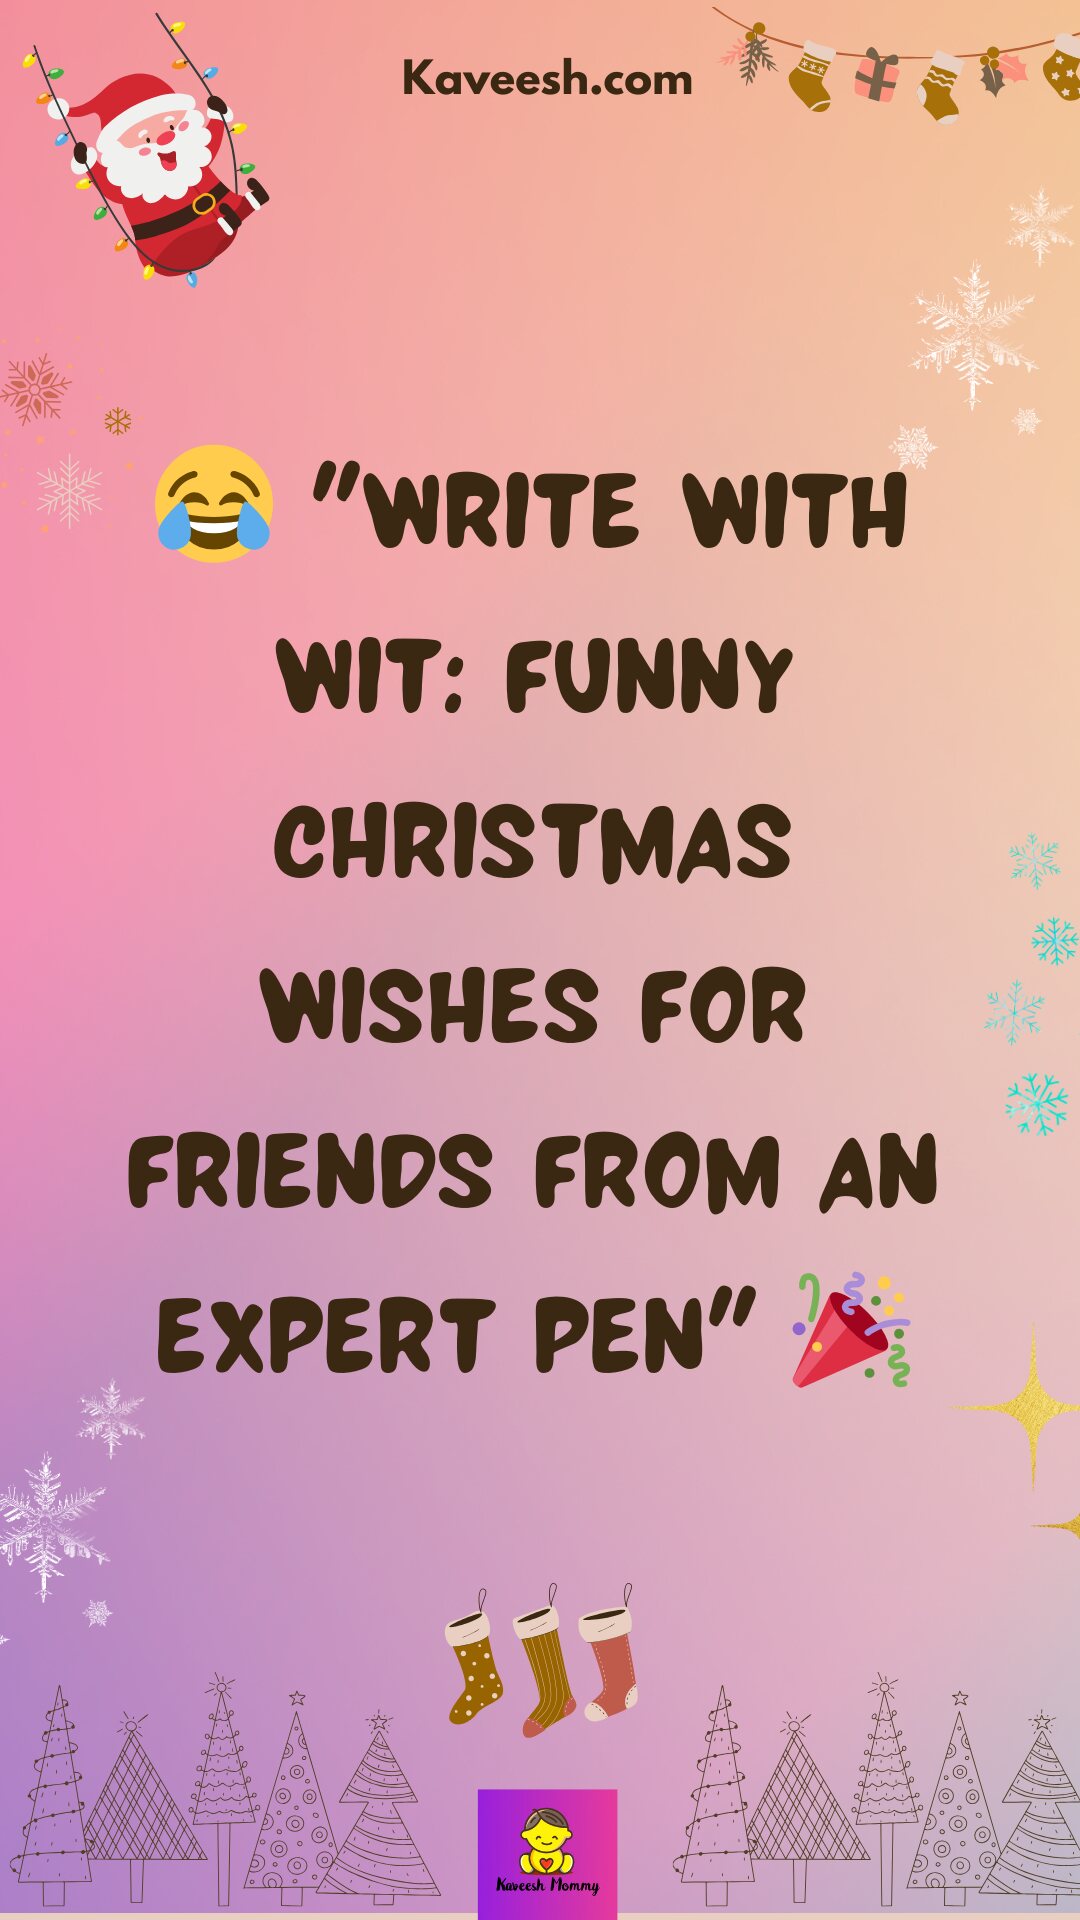 List of funny Christmas wishes for friends